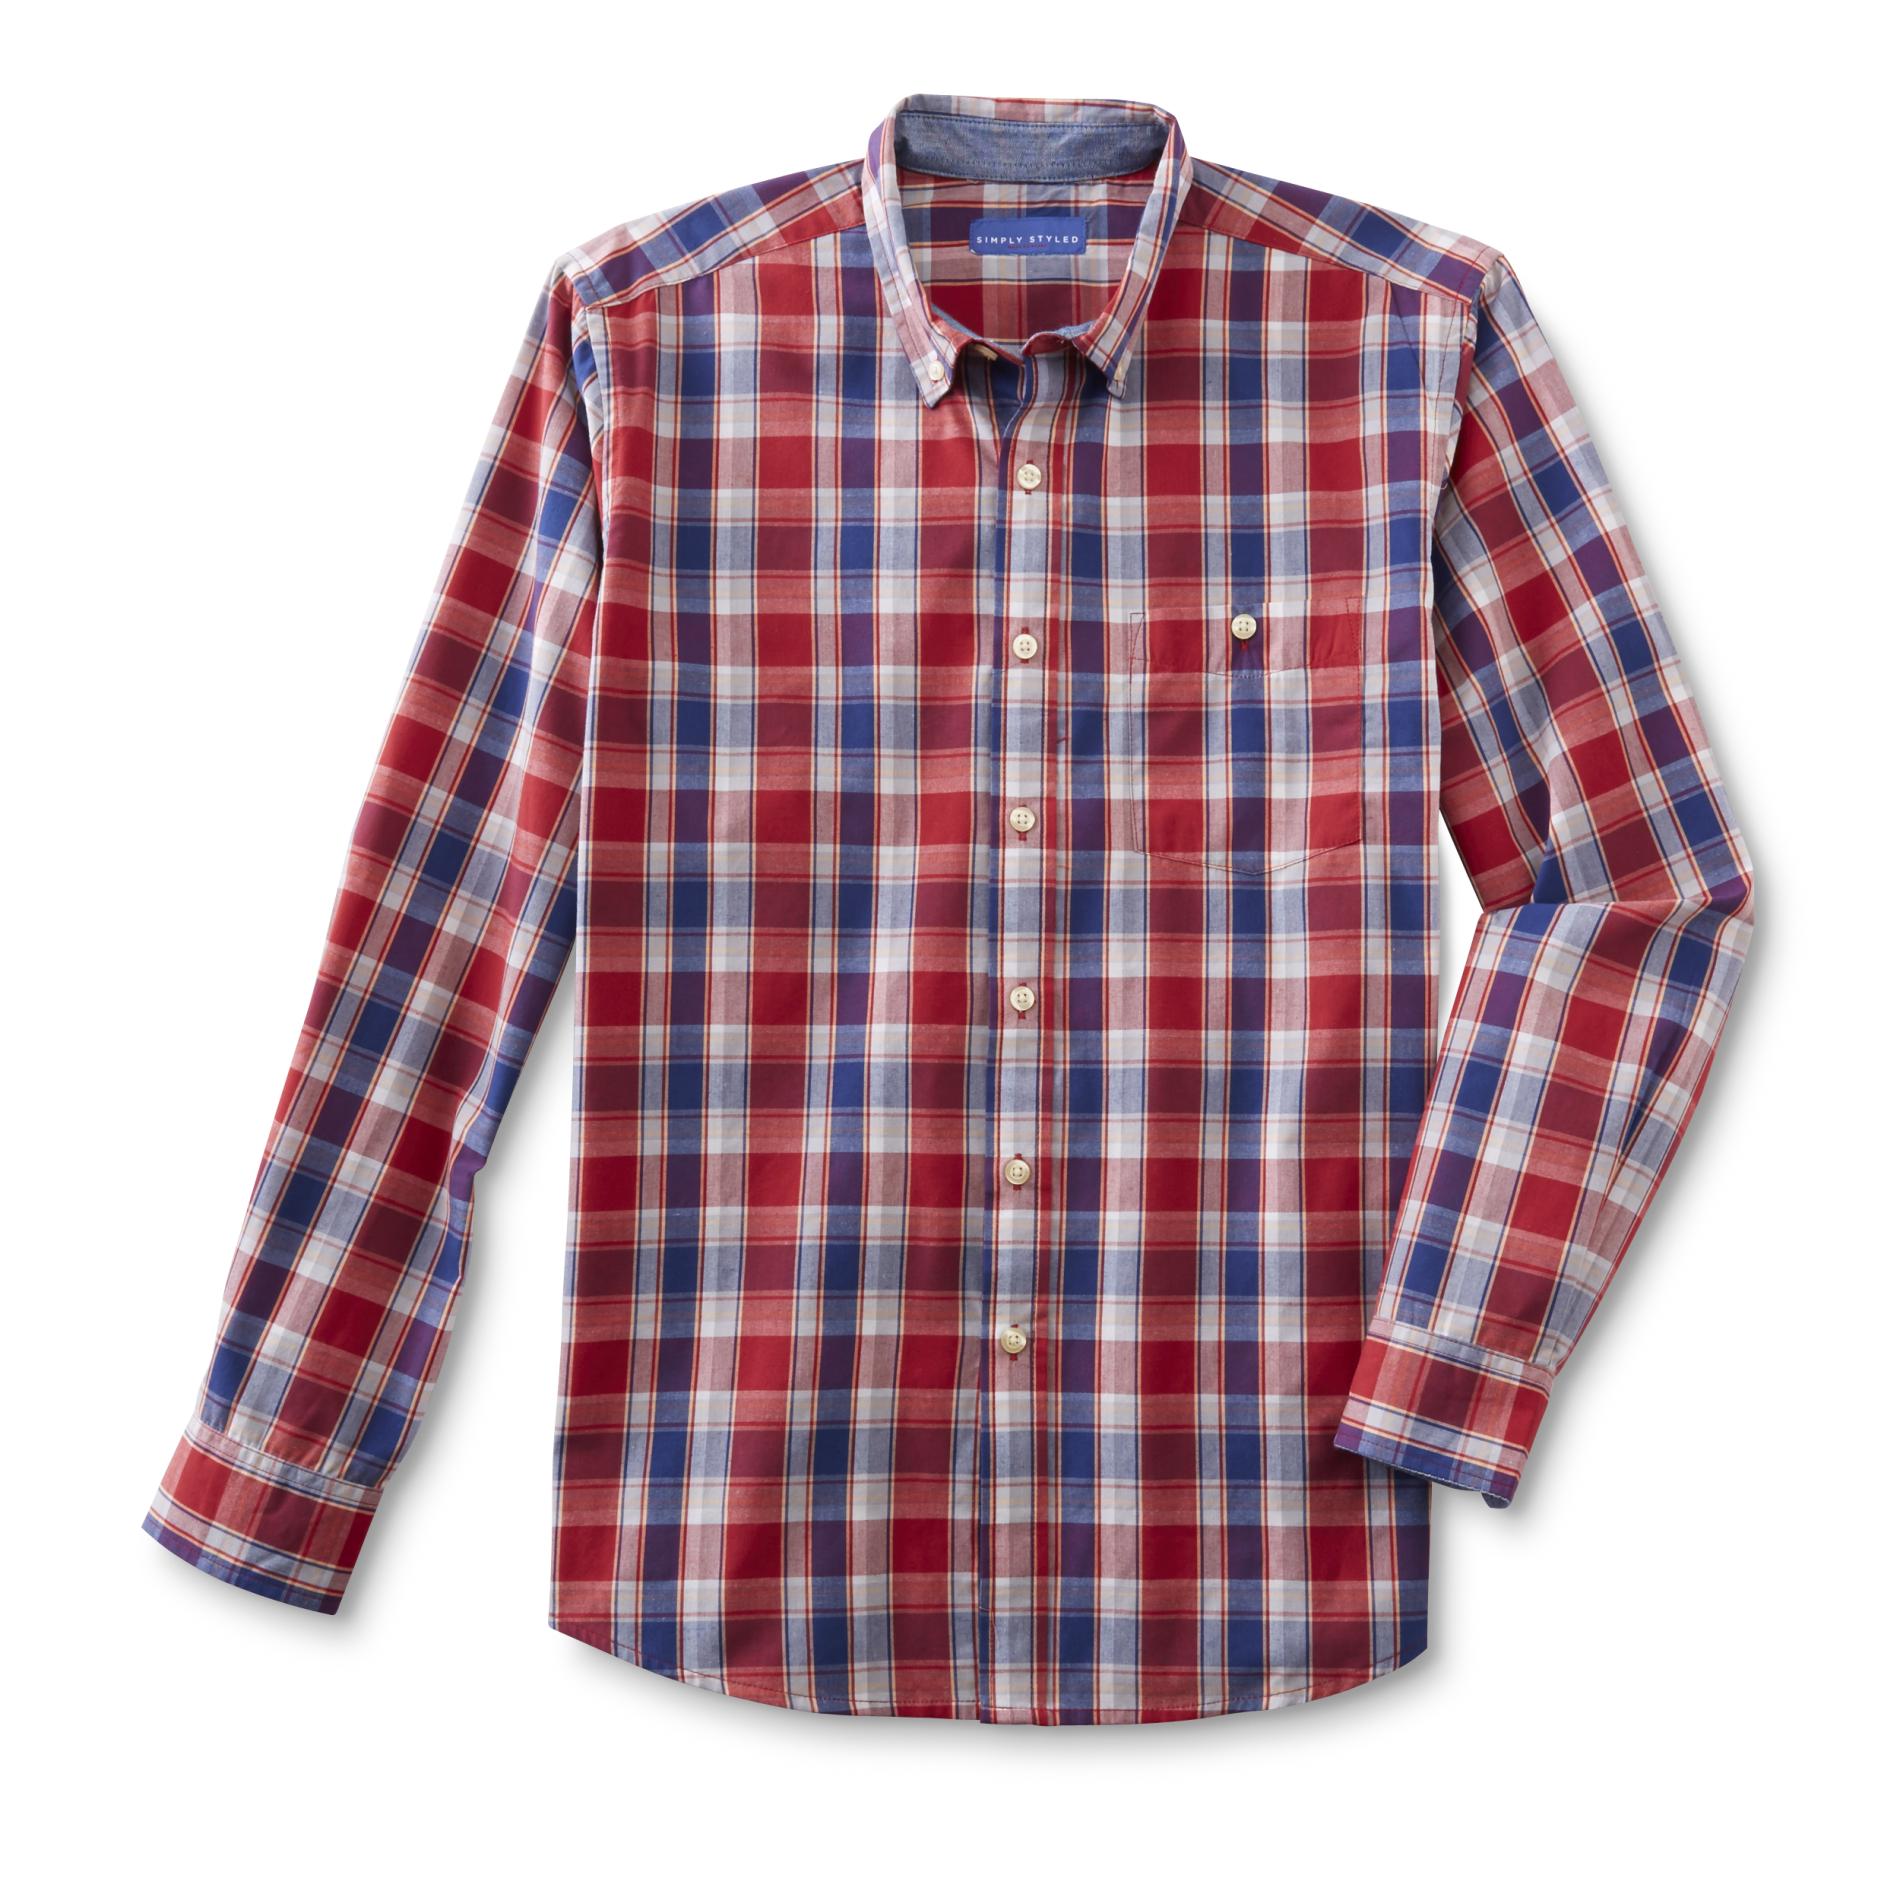 Simply Styled Men's Woven Long-Sleeve Shirt - Plaid